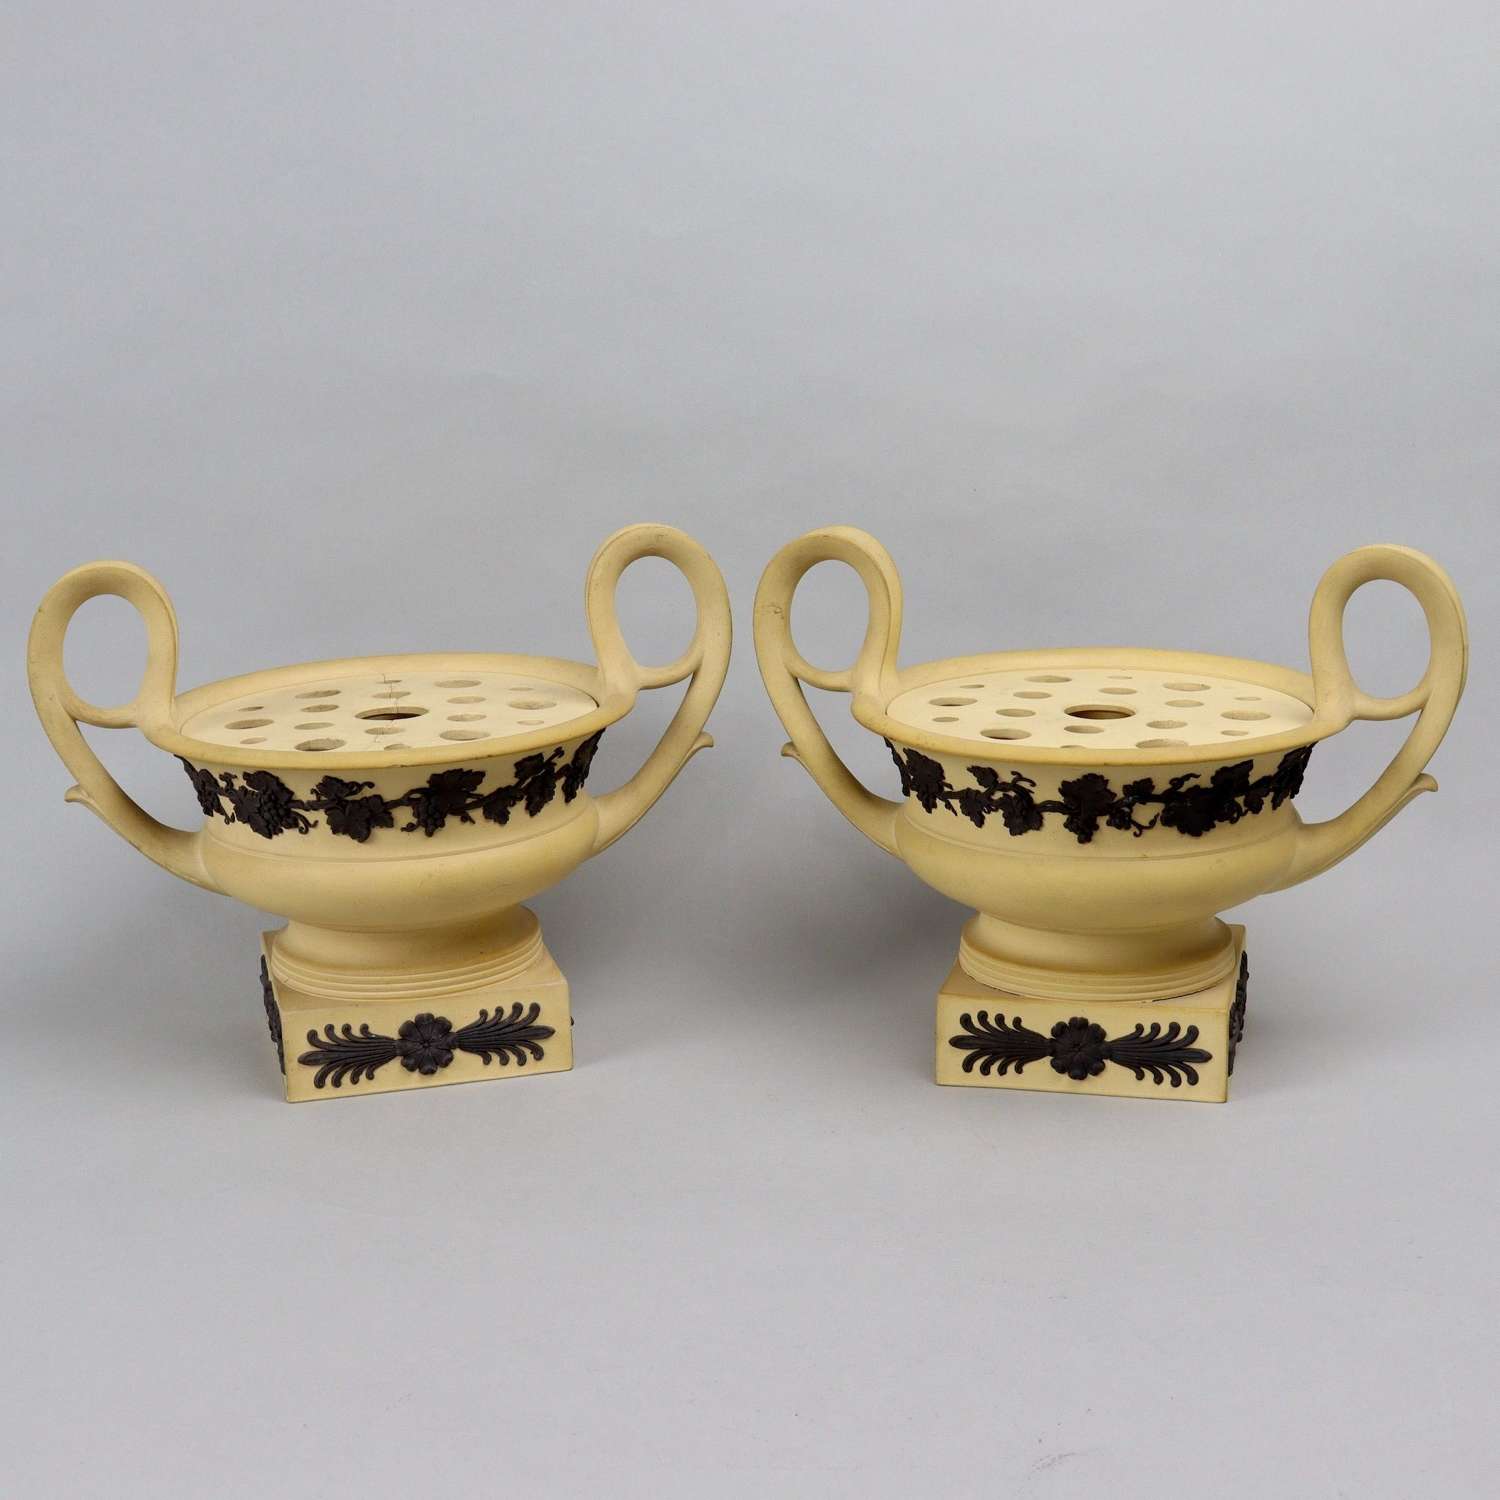 Wedgwood Caneware Crater Vases